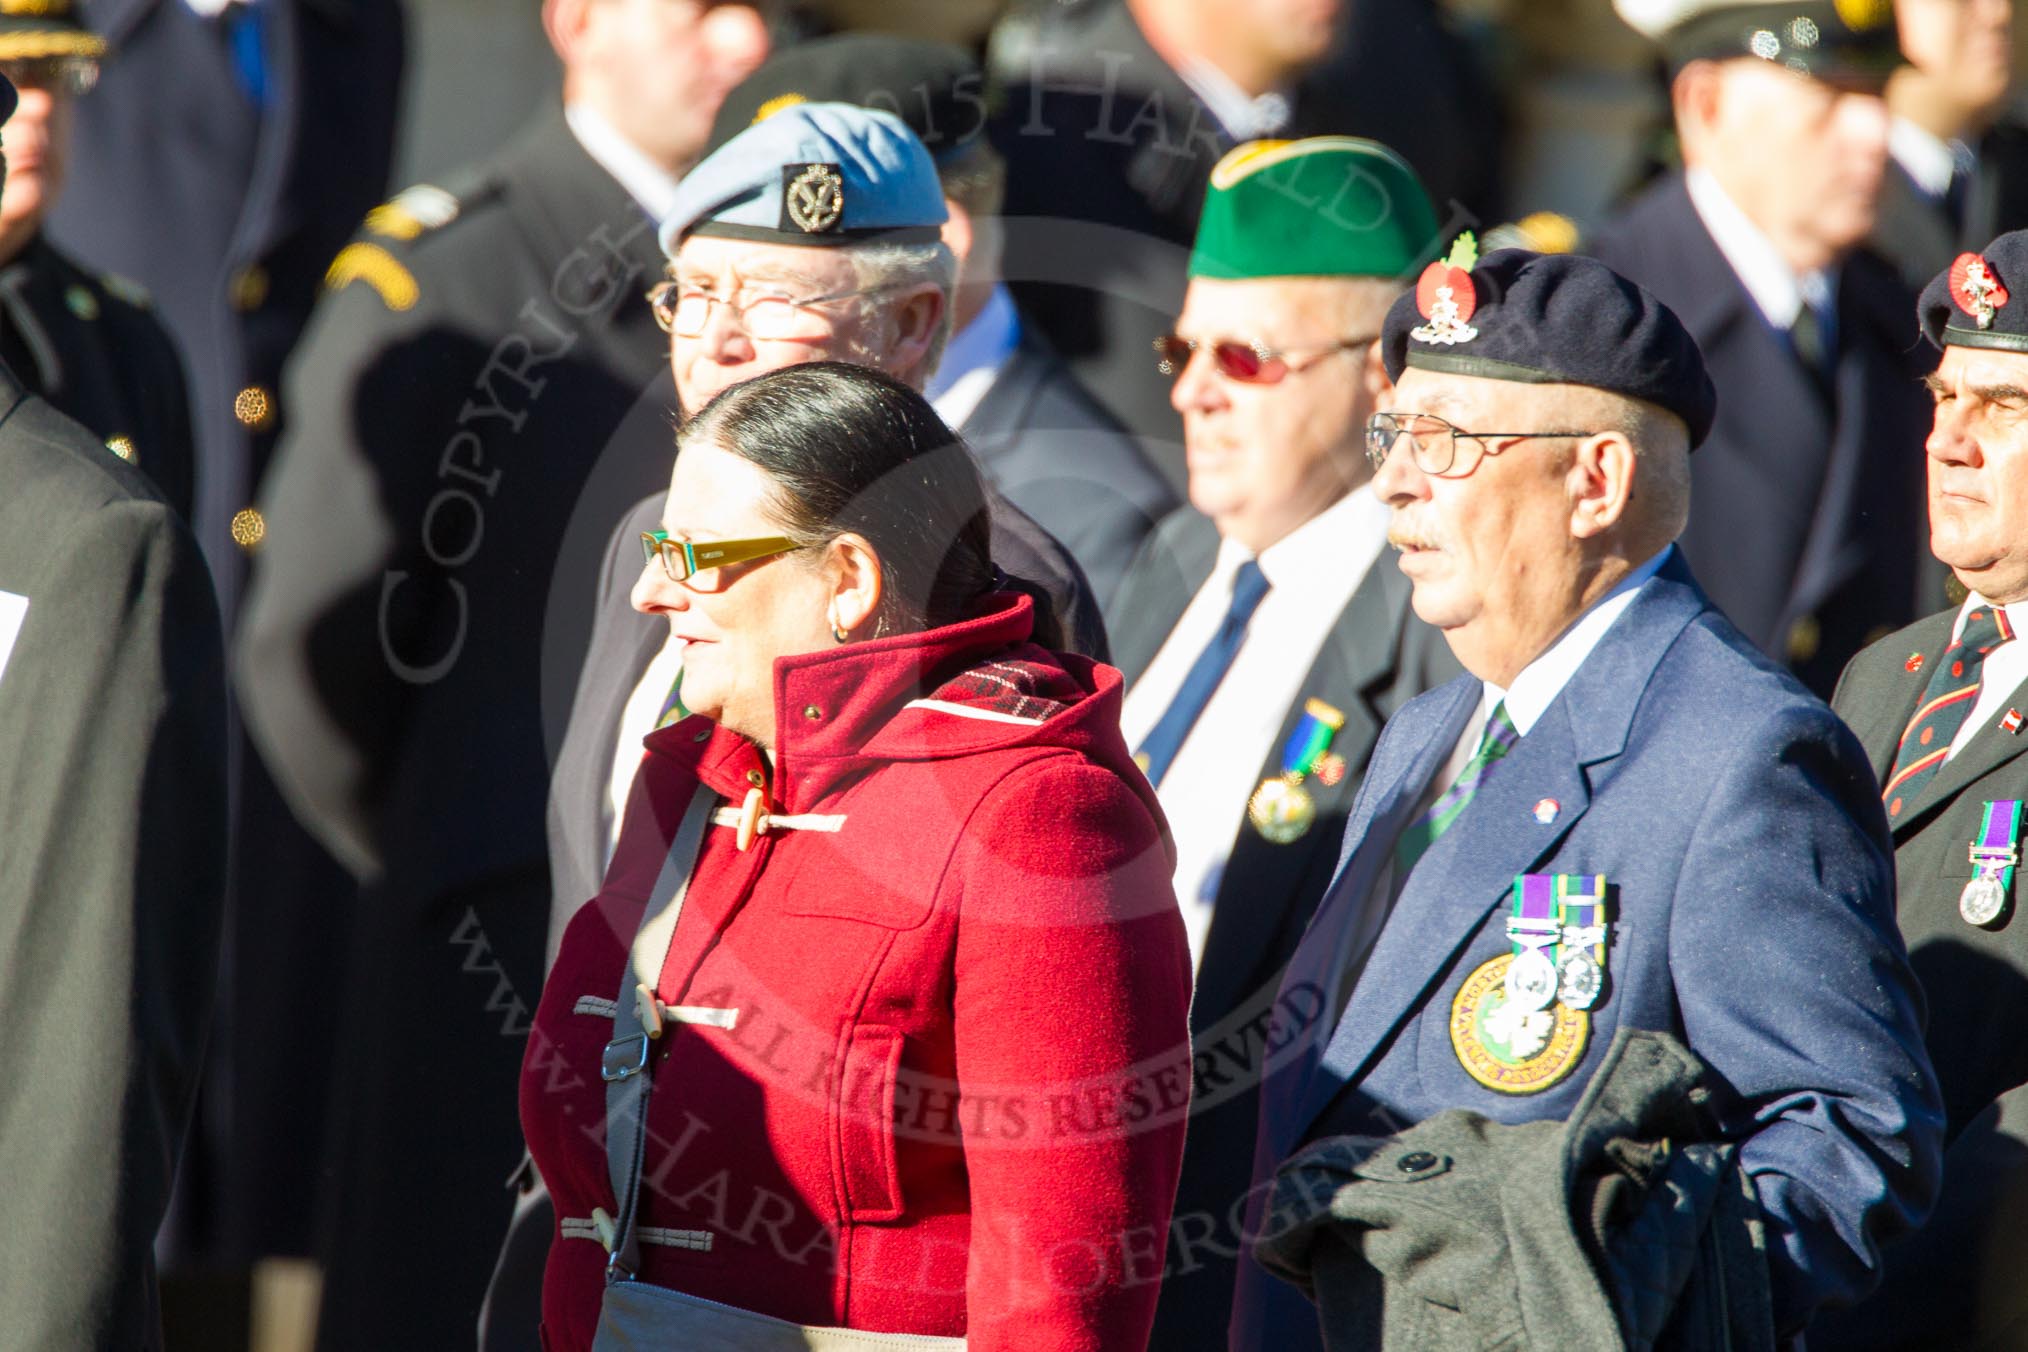 Remembrance Sunday Cenotaph March Past 2013: D18 - the Northrn Ireland Veterans' Association  with 42 marchers, or D19 - the Irish United Nations Veterans Association with 12 marchers, more information would be appreciated!.
Press stand opposite the Foreign Office building, Whitehall, London SW1,
London,
Greater London,
United Kingdom,
on 10 November 2013 at 11:40, image #144